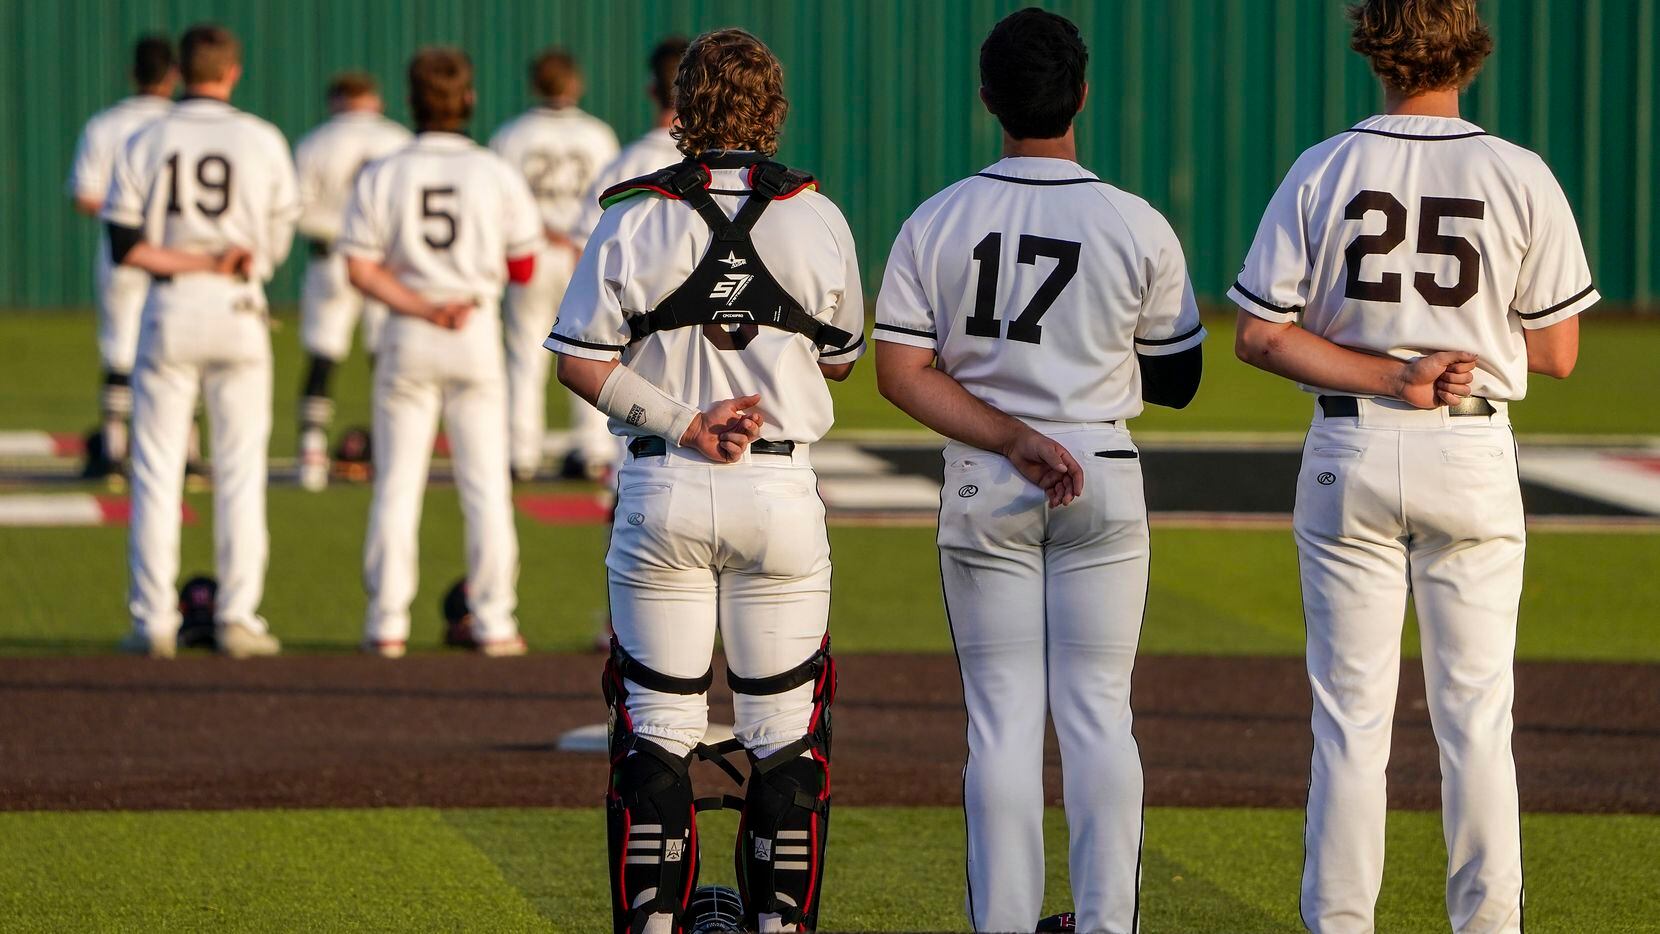 Rockwall-Heath players, including catcher Kevin Bazzell (9), pitcher Josh Hoover (17) and...